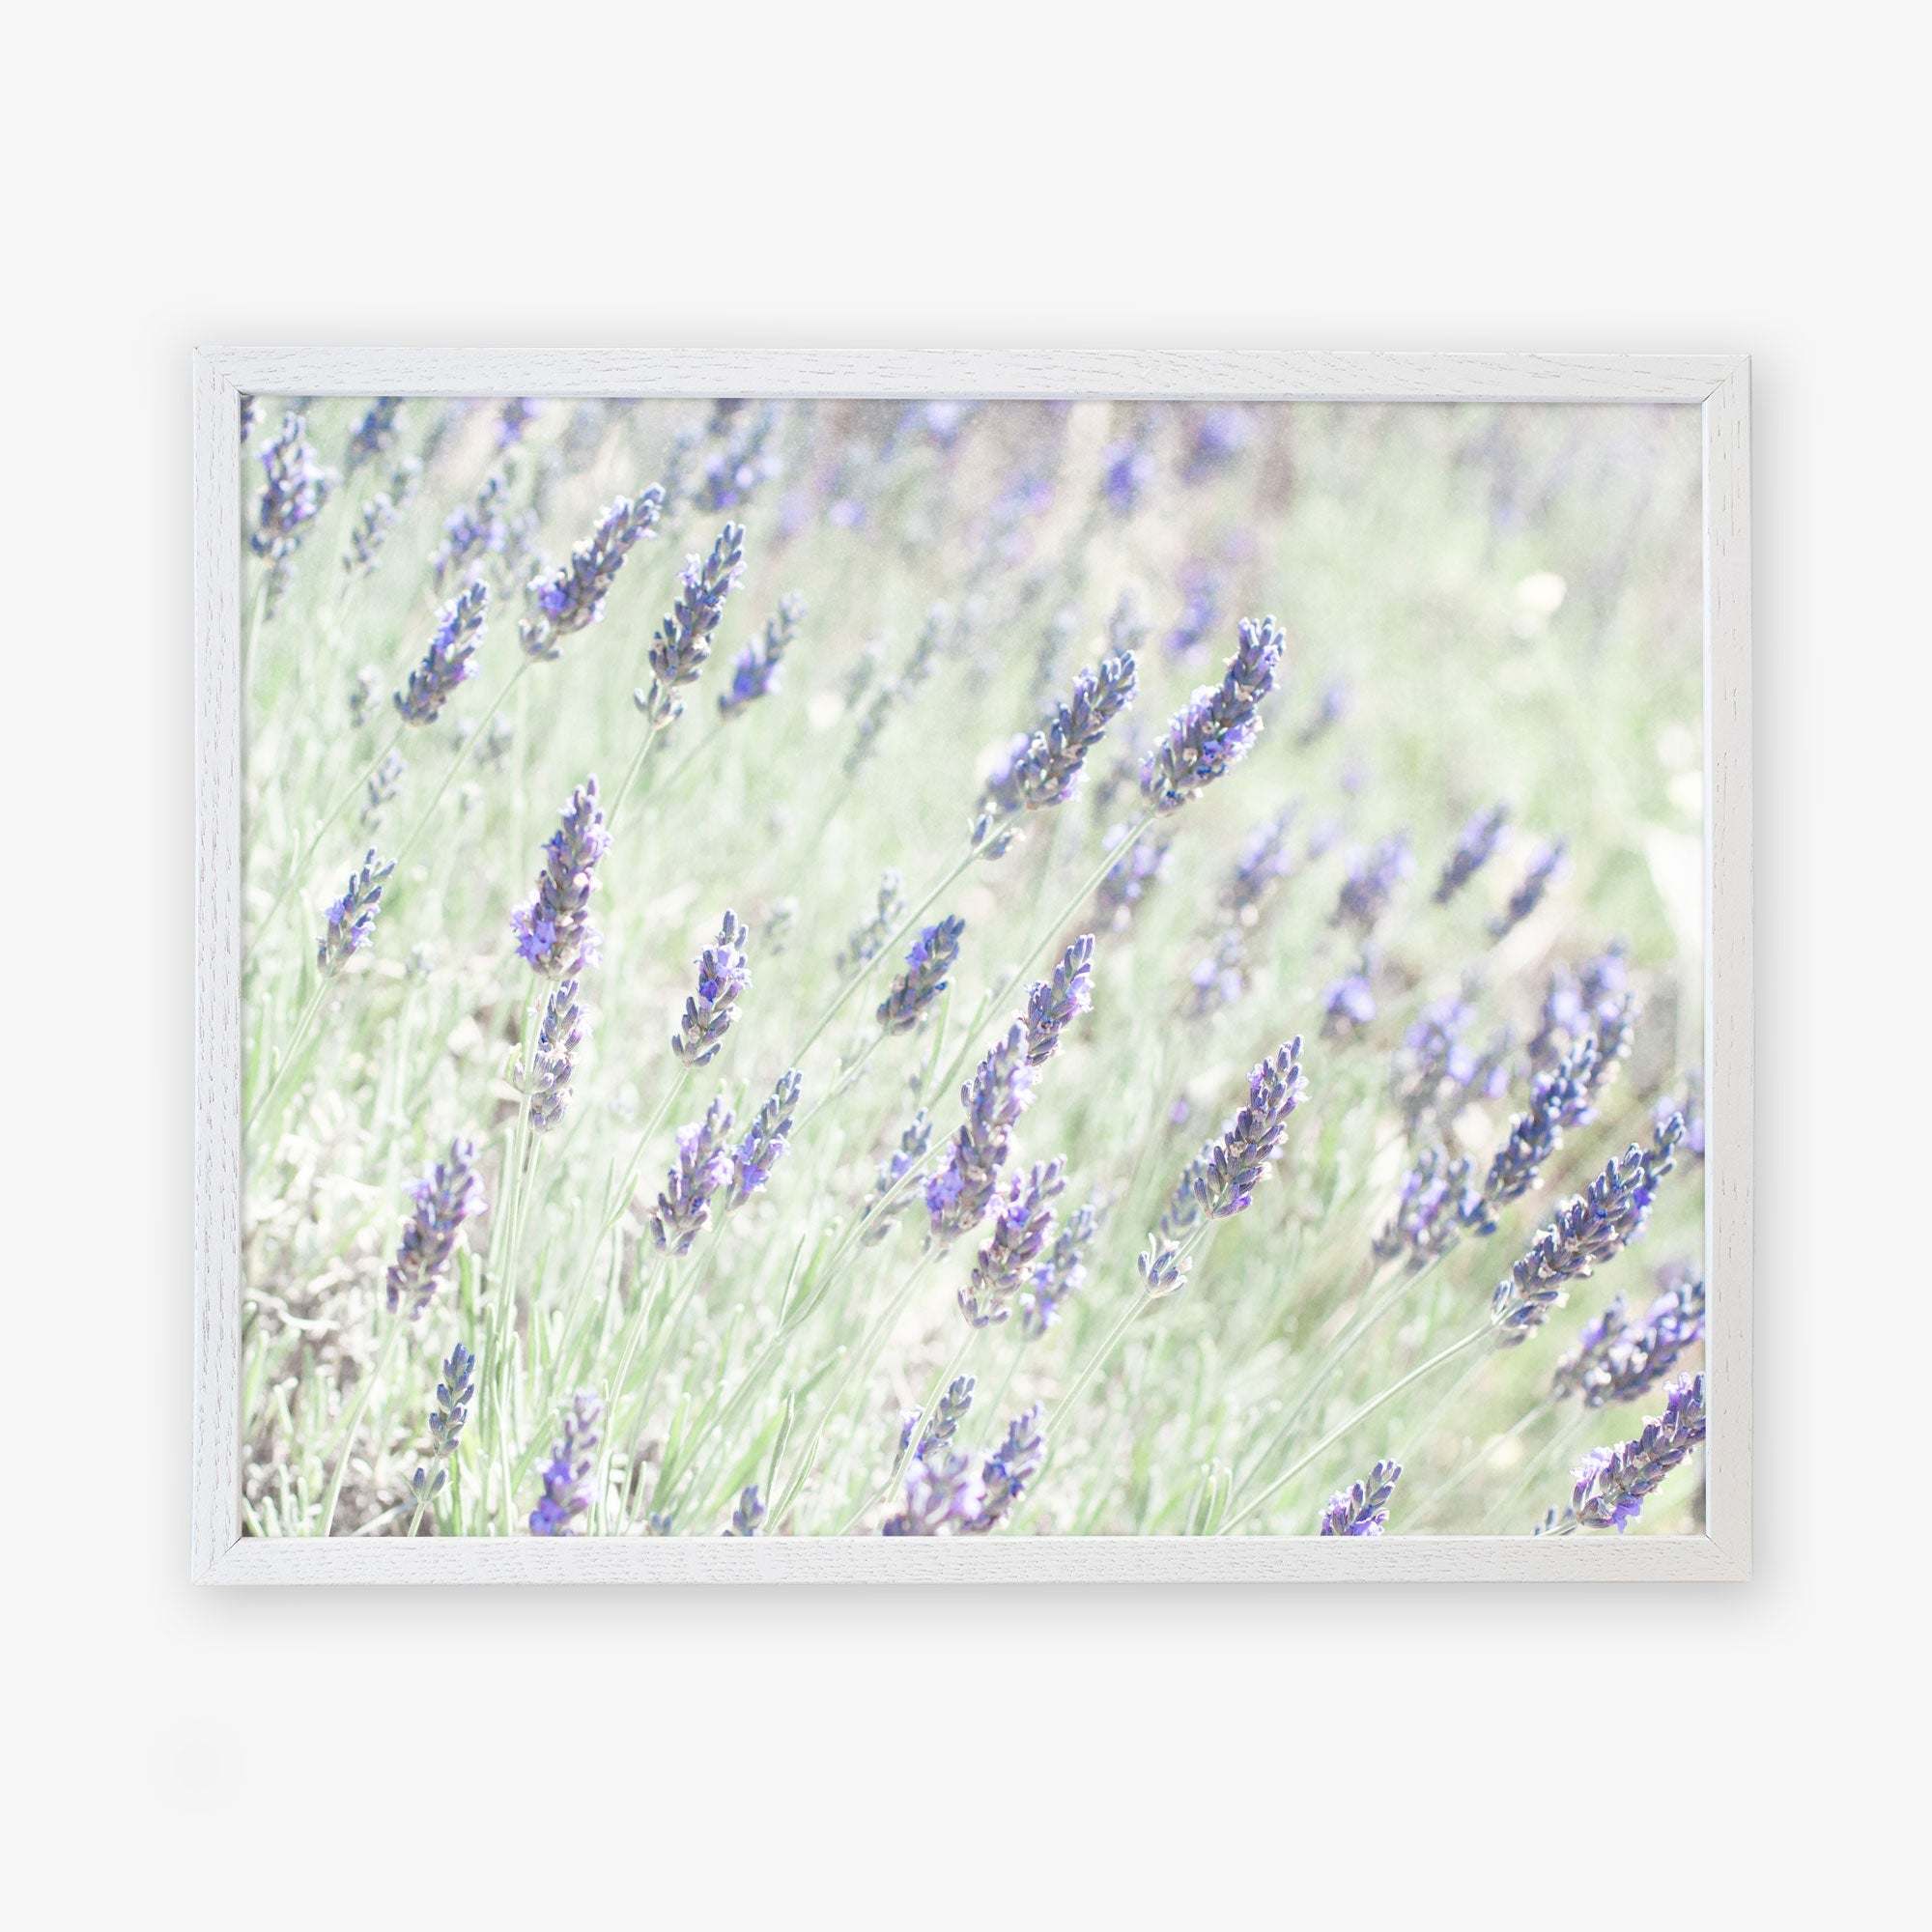 A framed photograph displaying a soft-focus view of a Floral Purple Print, &#39;Lavender for LaLa&#39; with vibrant purple blooms and green foliage, printed on archival photographic paper. The background is gently blurred. (Offley Green)